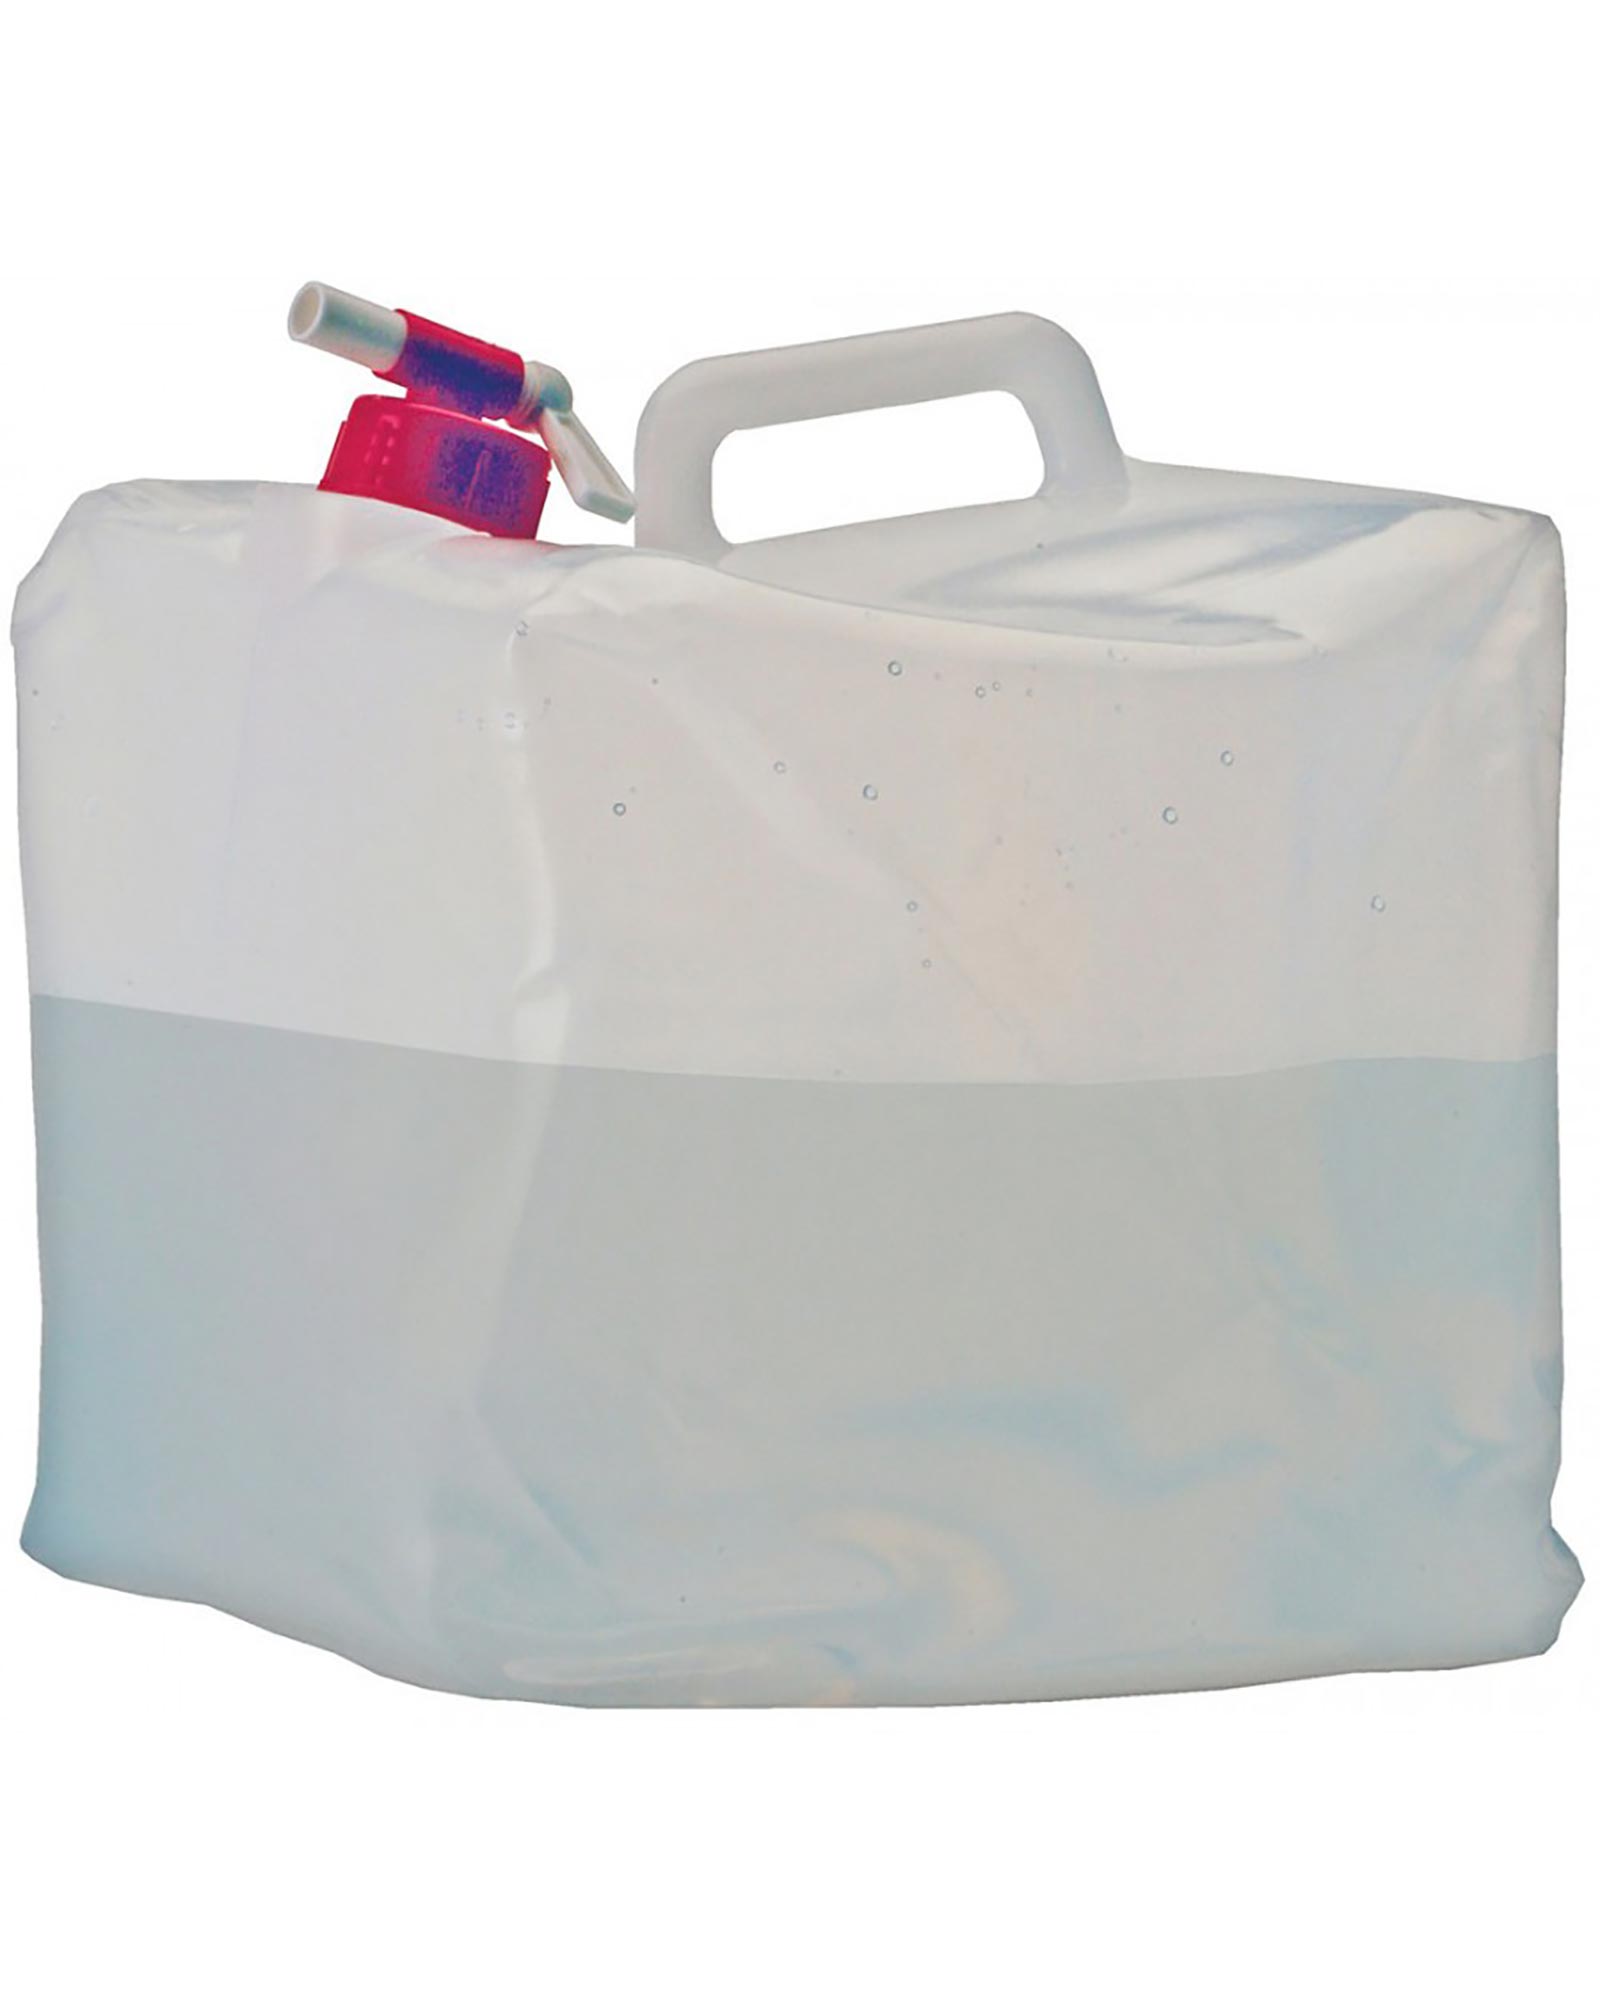 Vango Square Water Carrier 15L